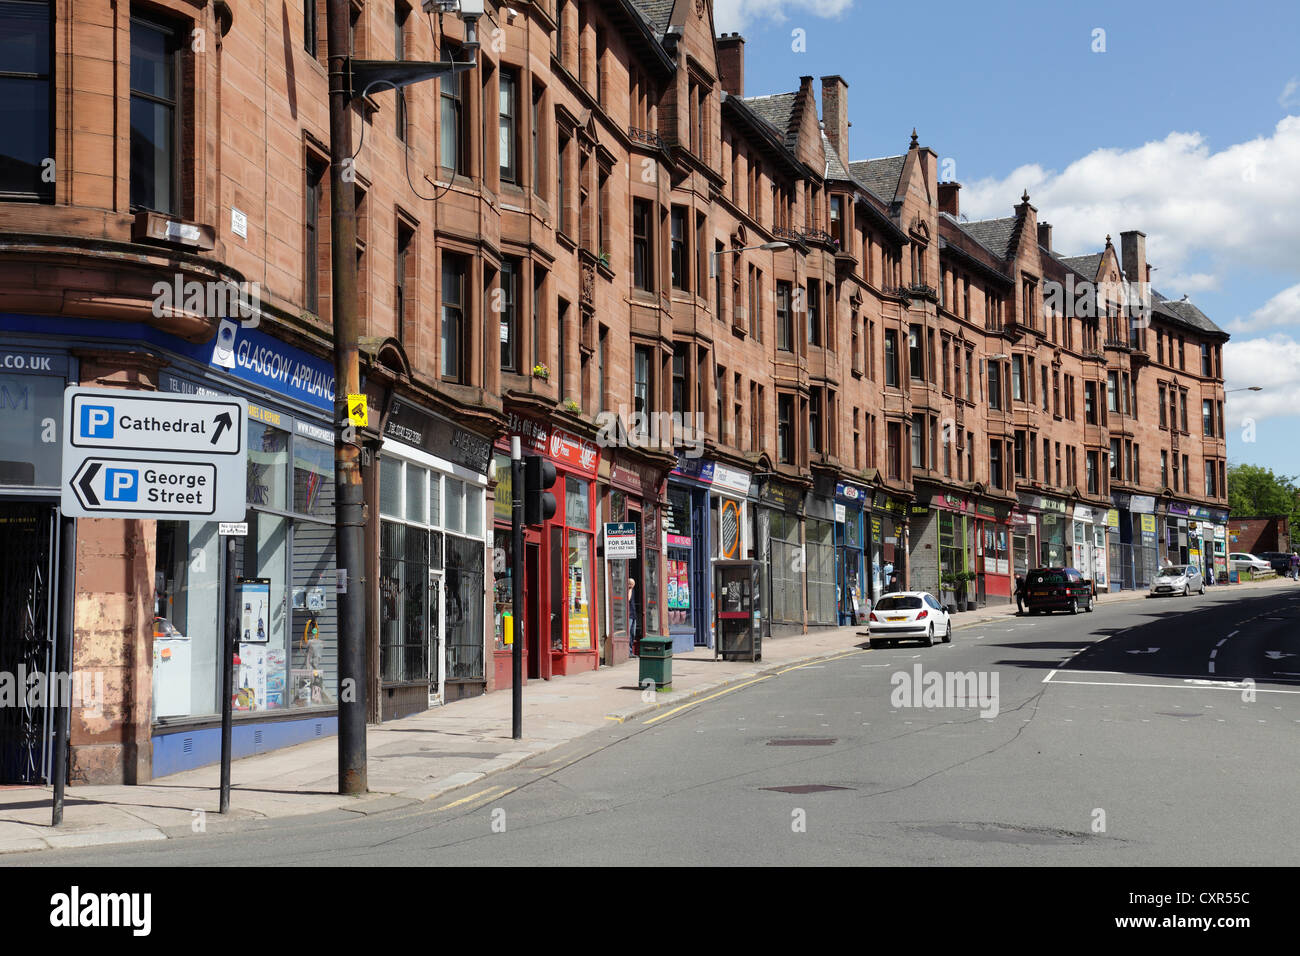 Looking North up High Street in Glasgow, Scotland, UK Stock Photo